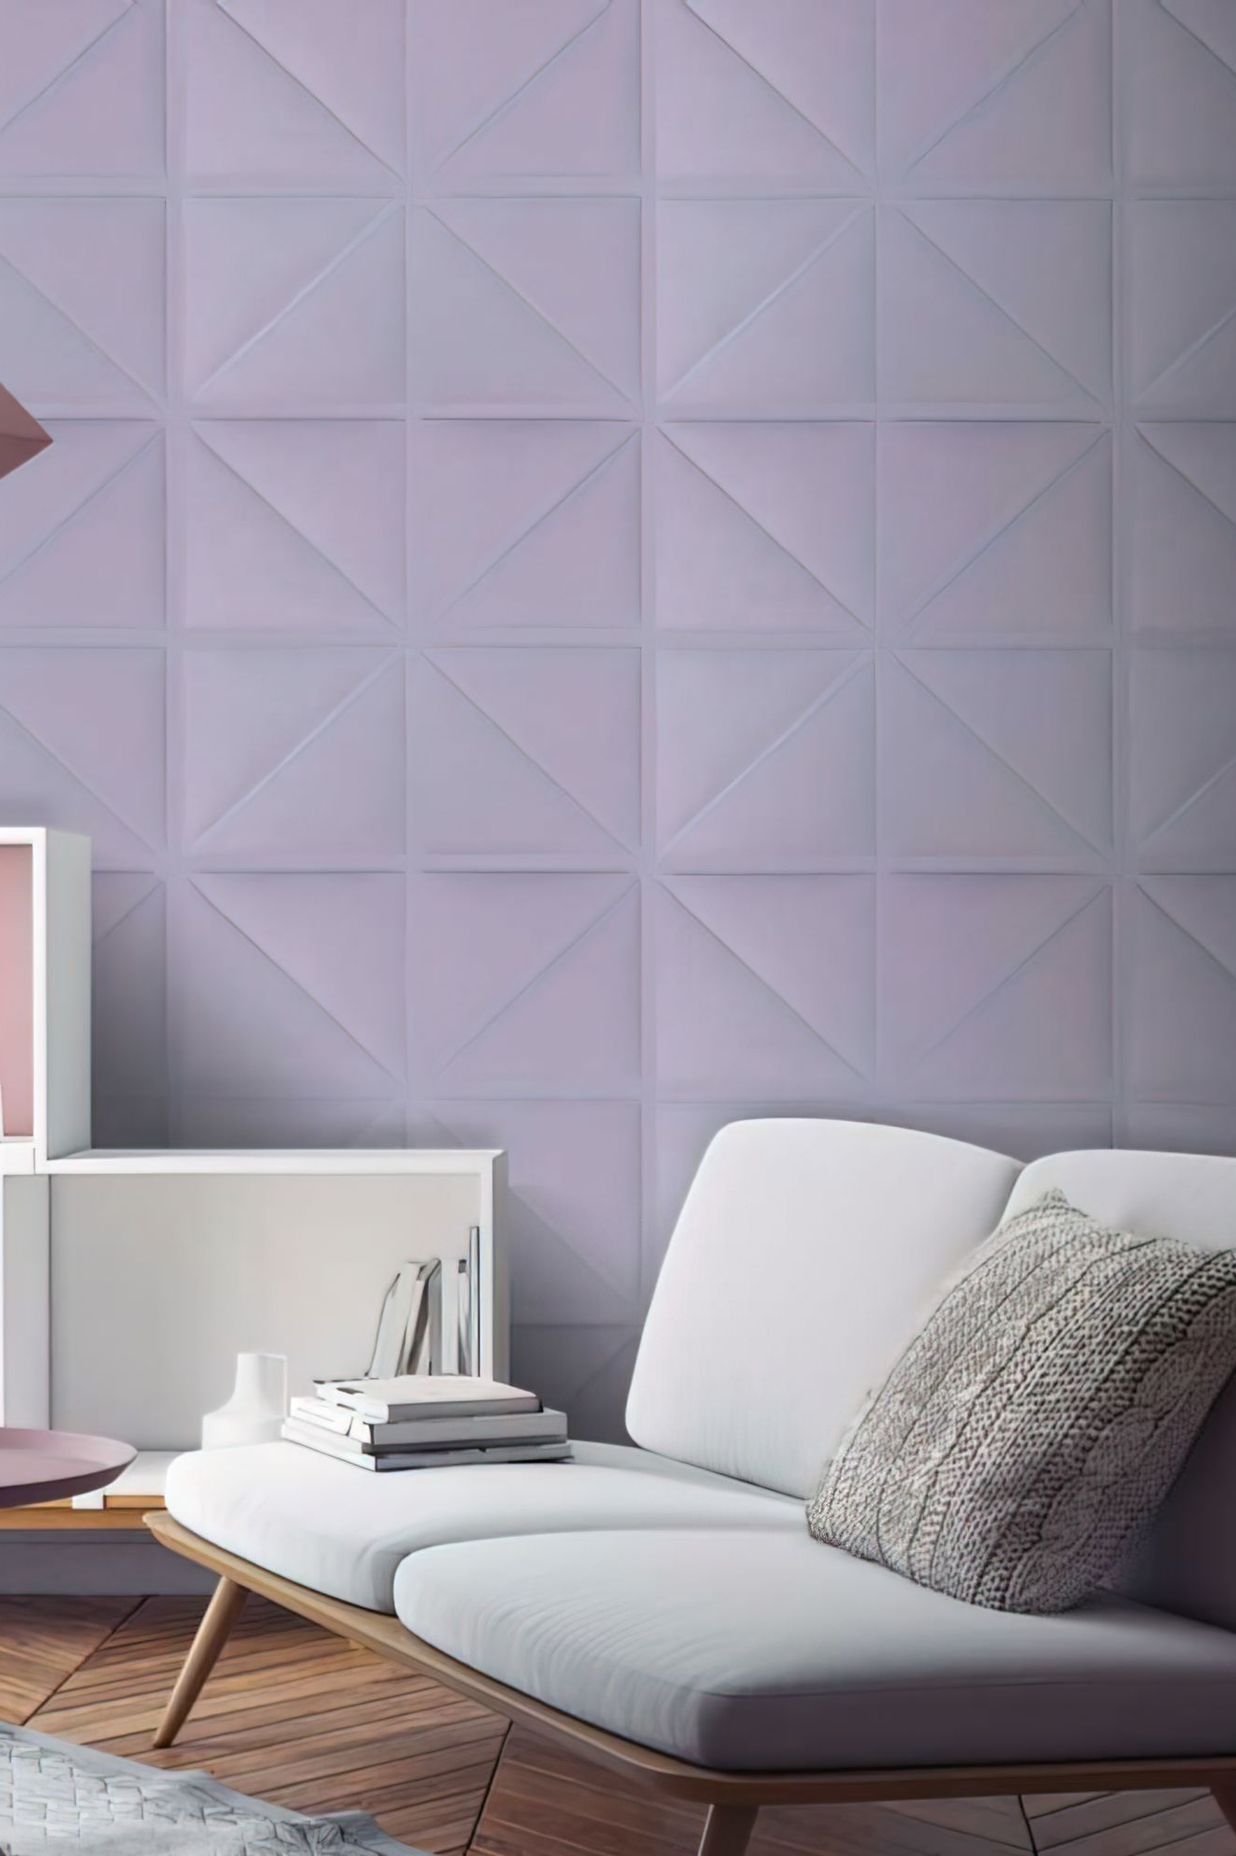 Rapallo also supplies a range of acoustic wallpapers, tiles and panels.